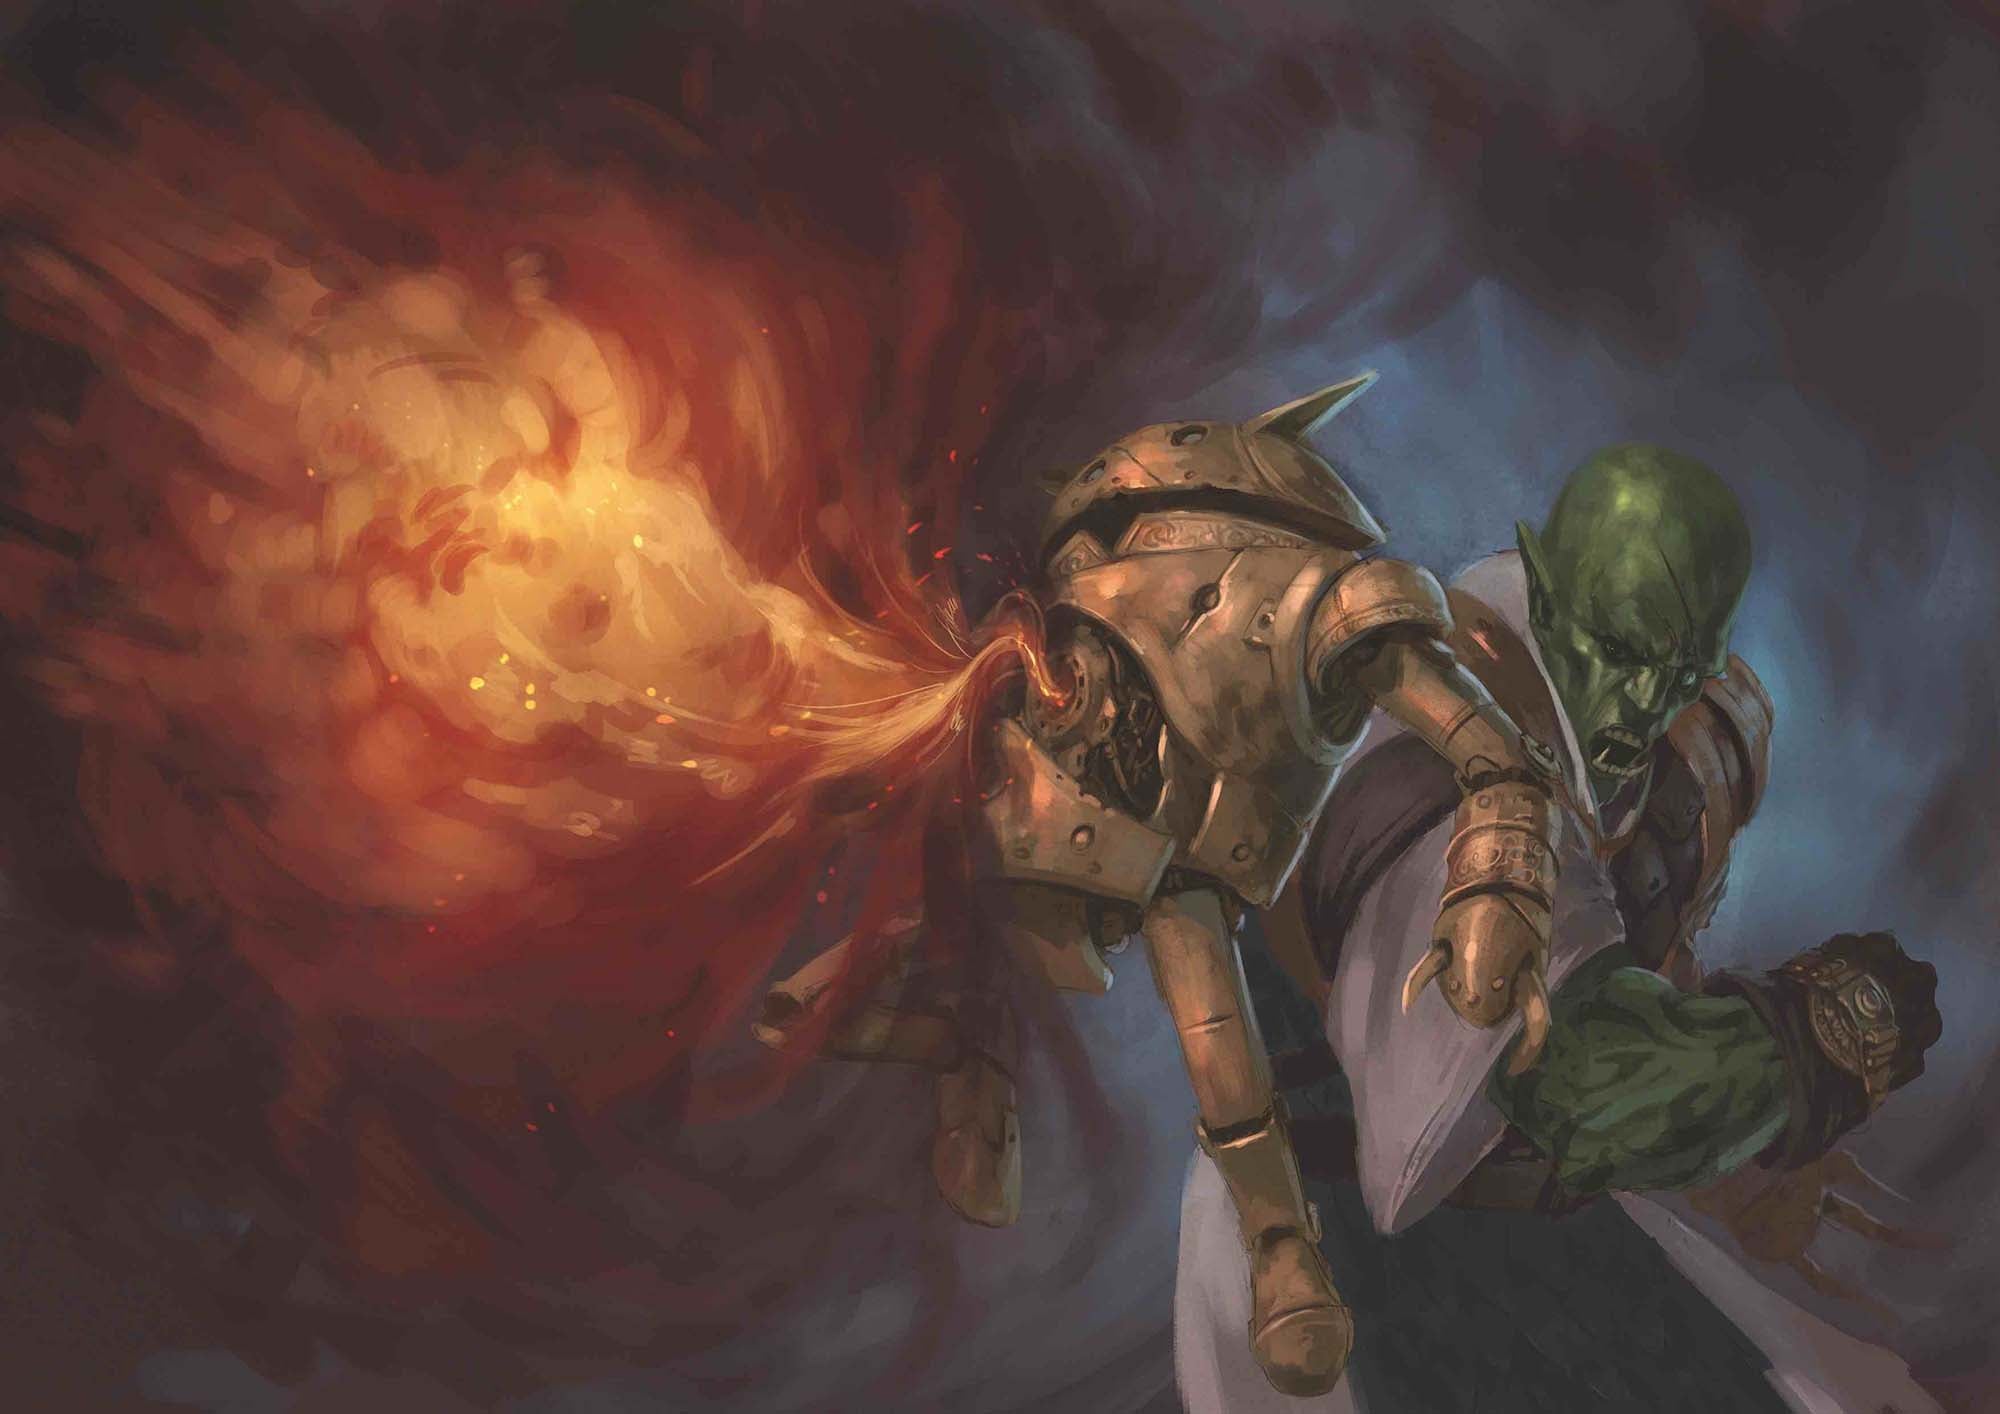 A copper clockwork goblin leaps into the air in front of a bald half-orc. A small door in the construct’s chest reveals a nozzle from which a gout of flame flares.